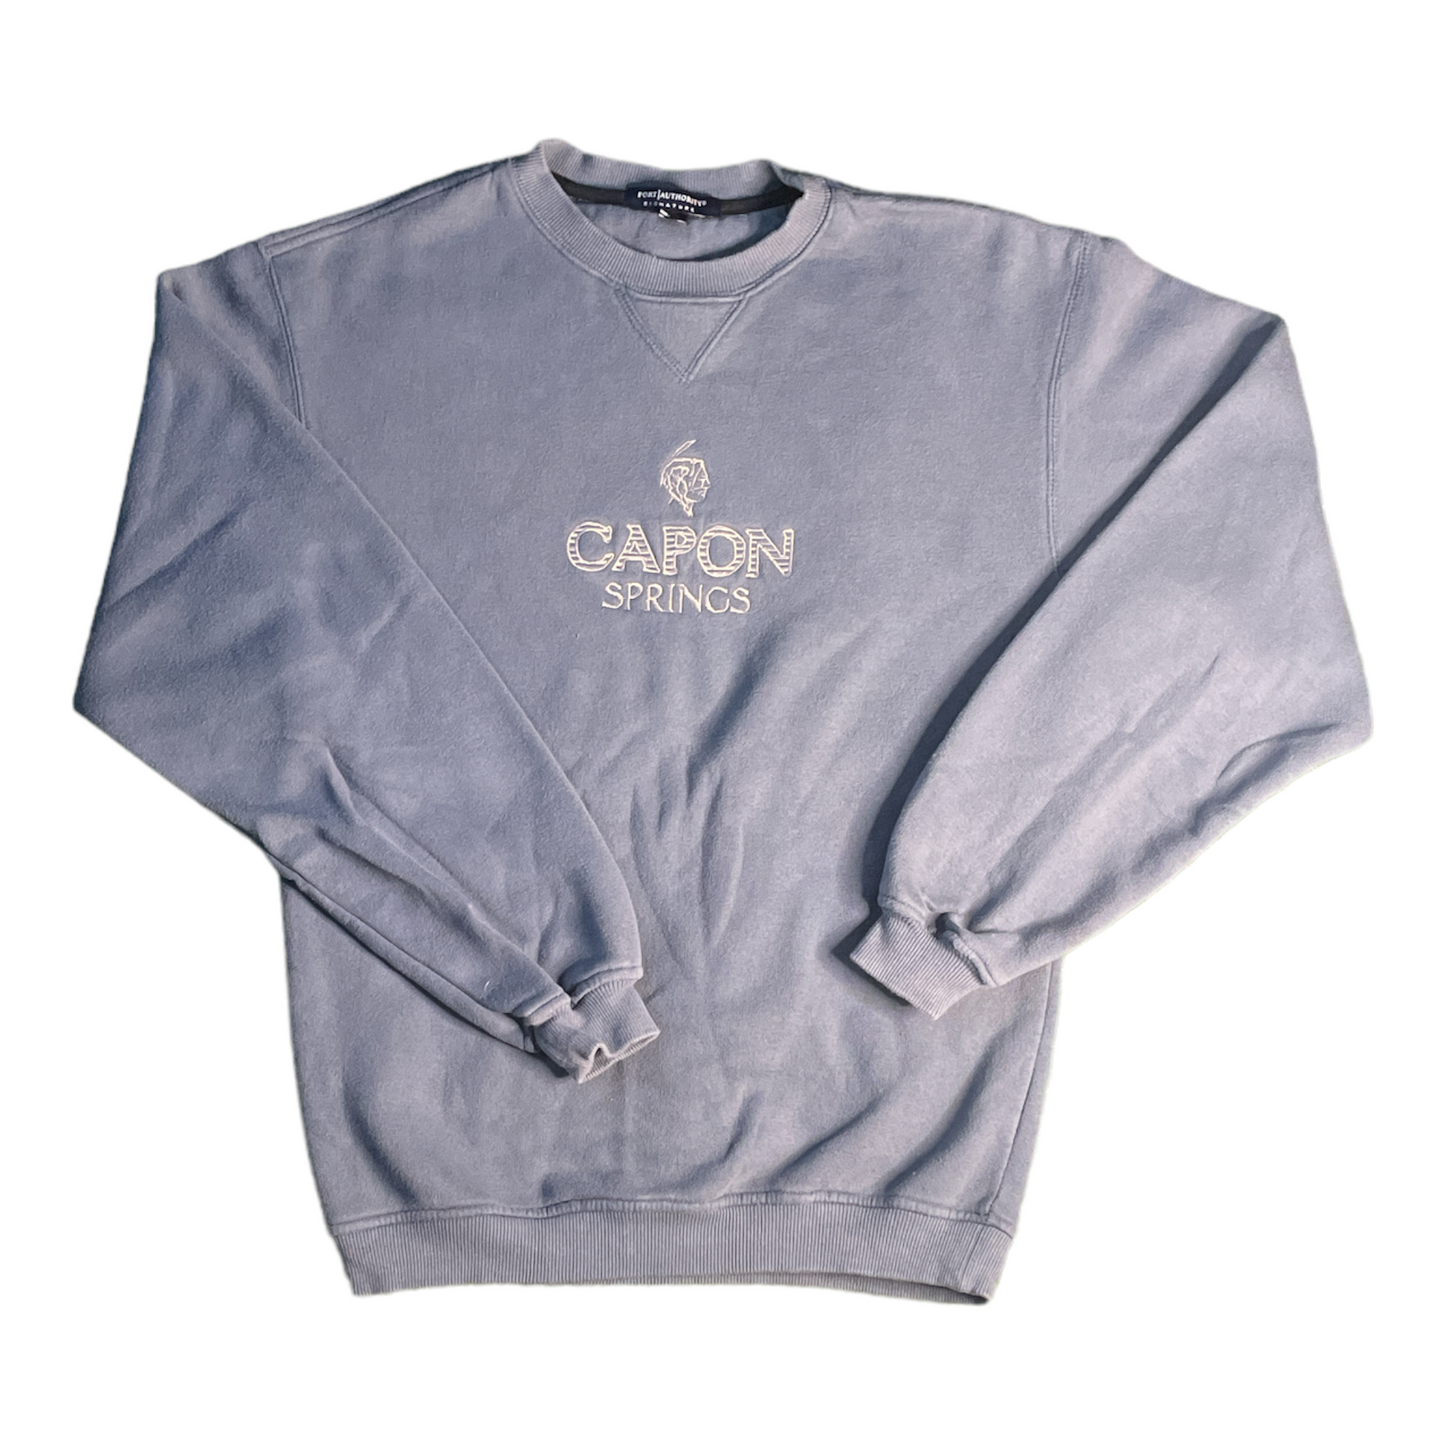 Capon Springs Embroidered Sweater S